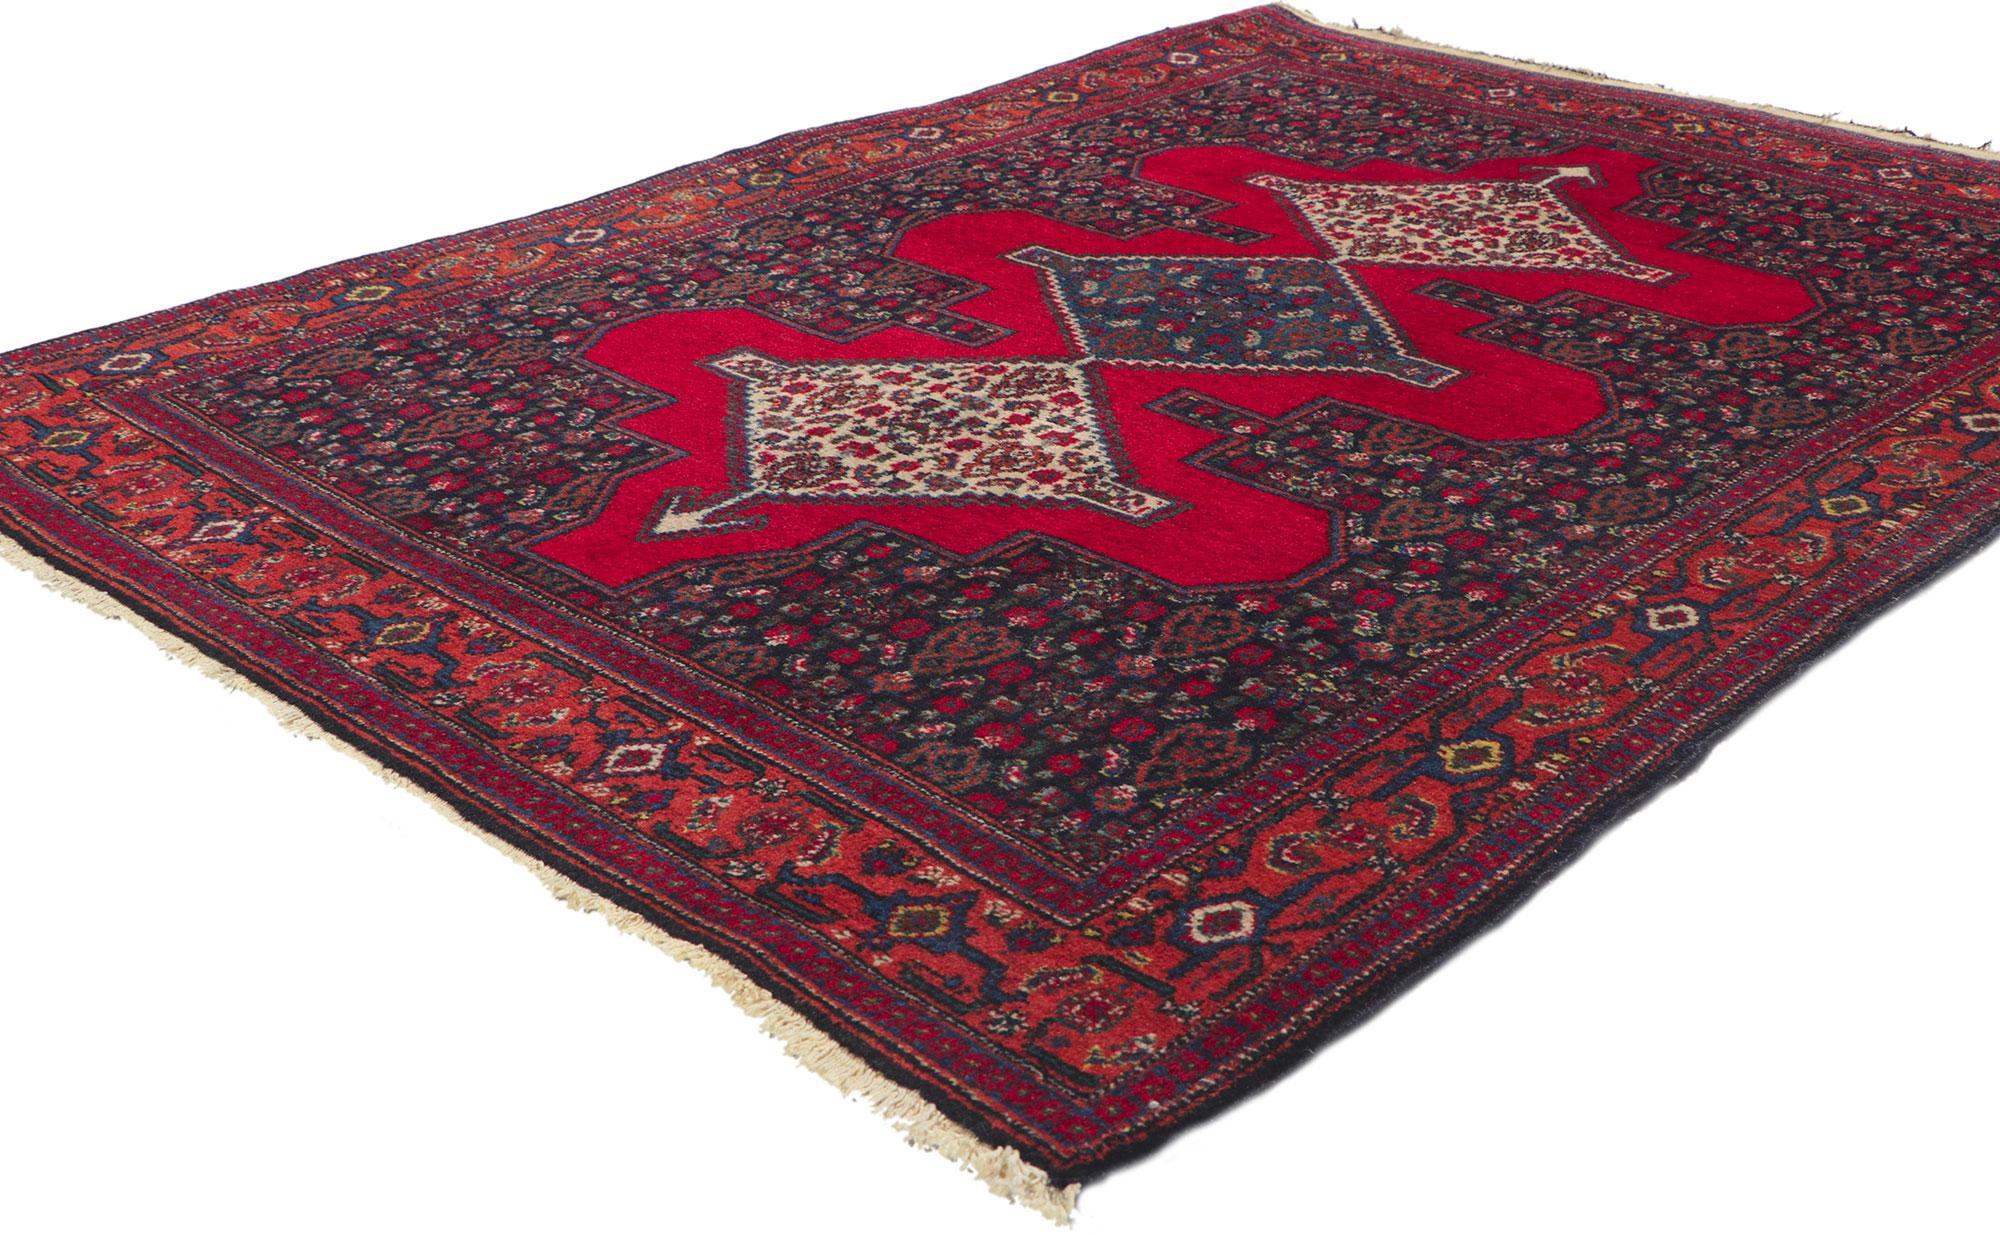 78307 Vintage Persian Senneh rug, 03'08 x 05'01.
Perfect for a small space, reading nook, grand foyer, designer entry, study, studio, den, walk-in closet, stair landing, alcove, mudroom, master bathroom, entryway, bedroom, private library, private